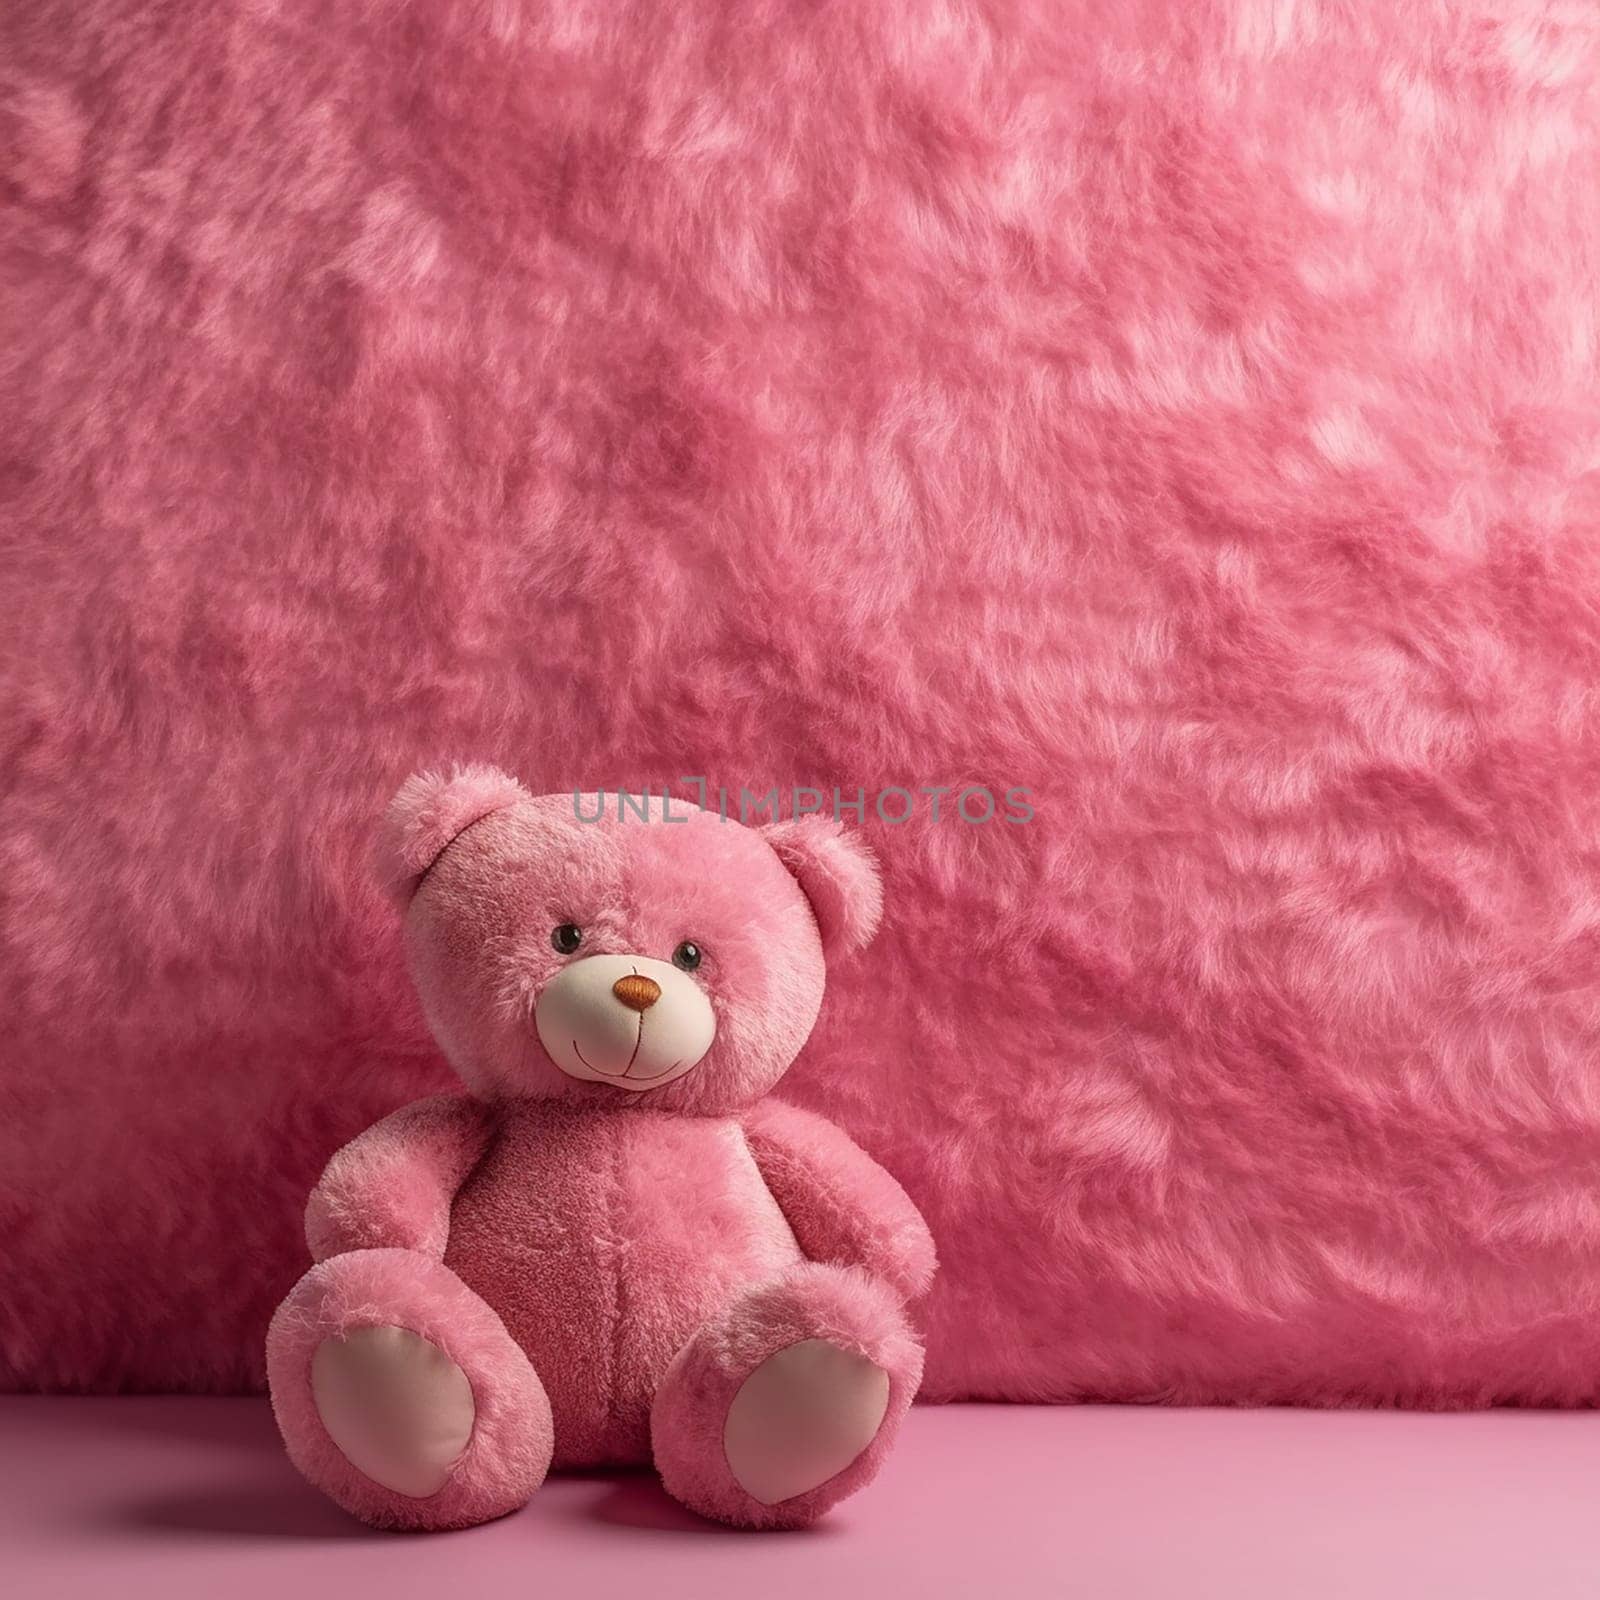 A pink teddy bear sits against a pink fluffy background.